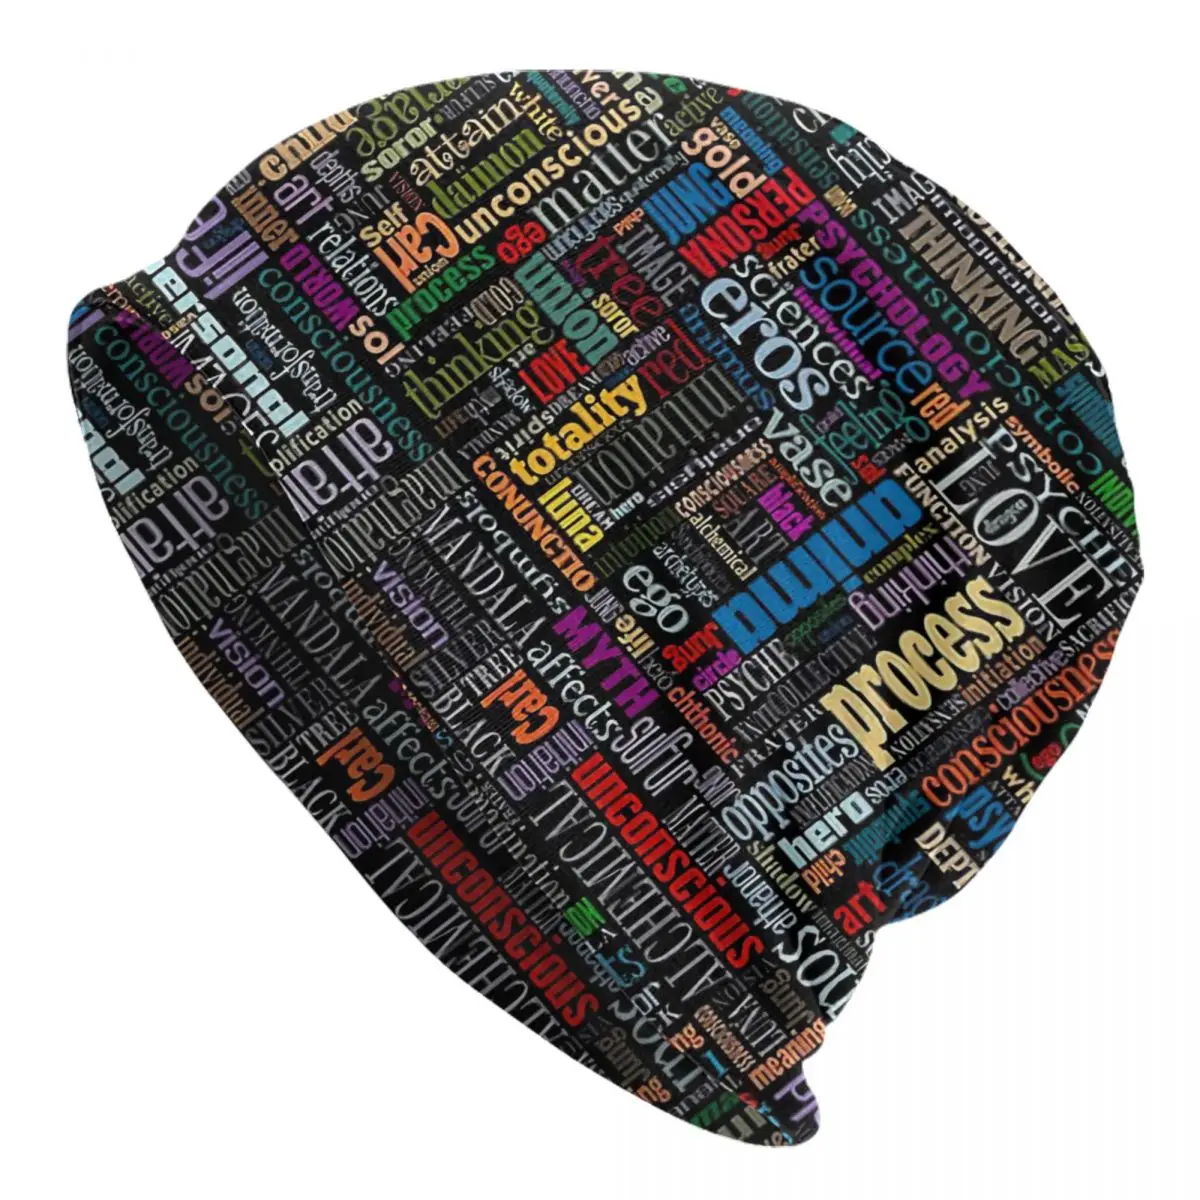 Jungian Psychology Word Cloud Adult Men's Women's Knit Hat Keep warm winter Funny knitted hat